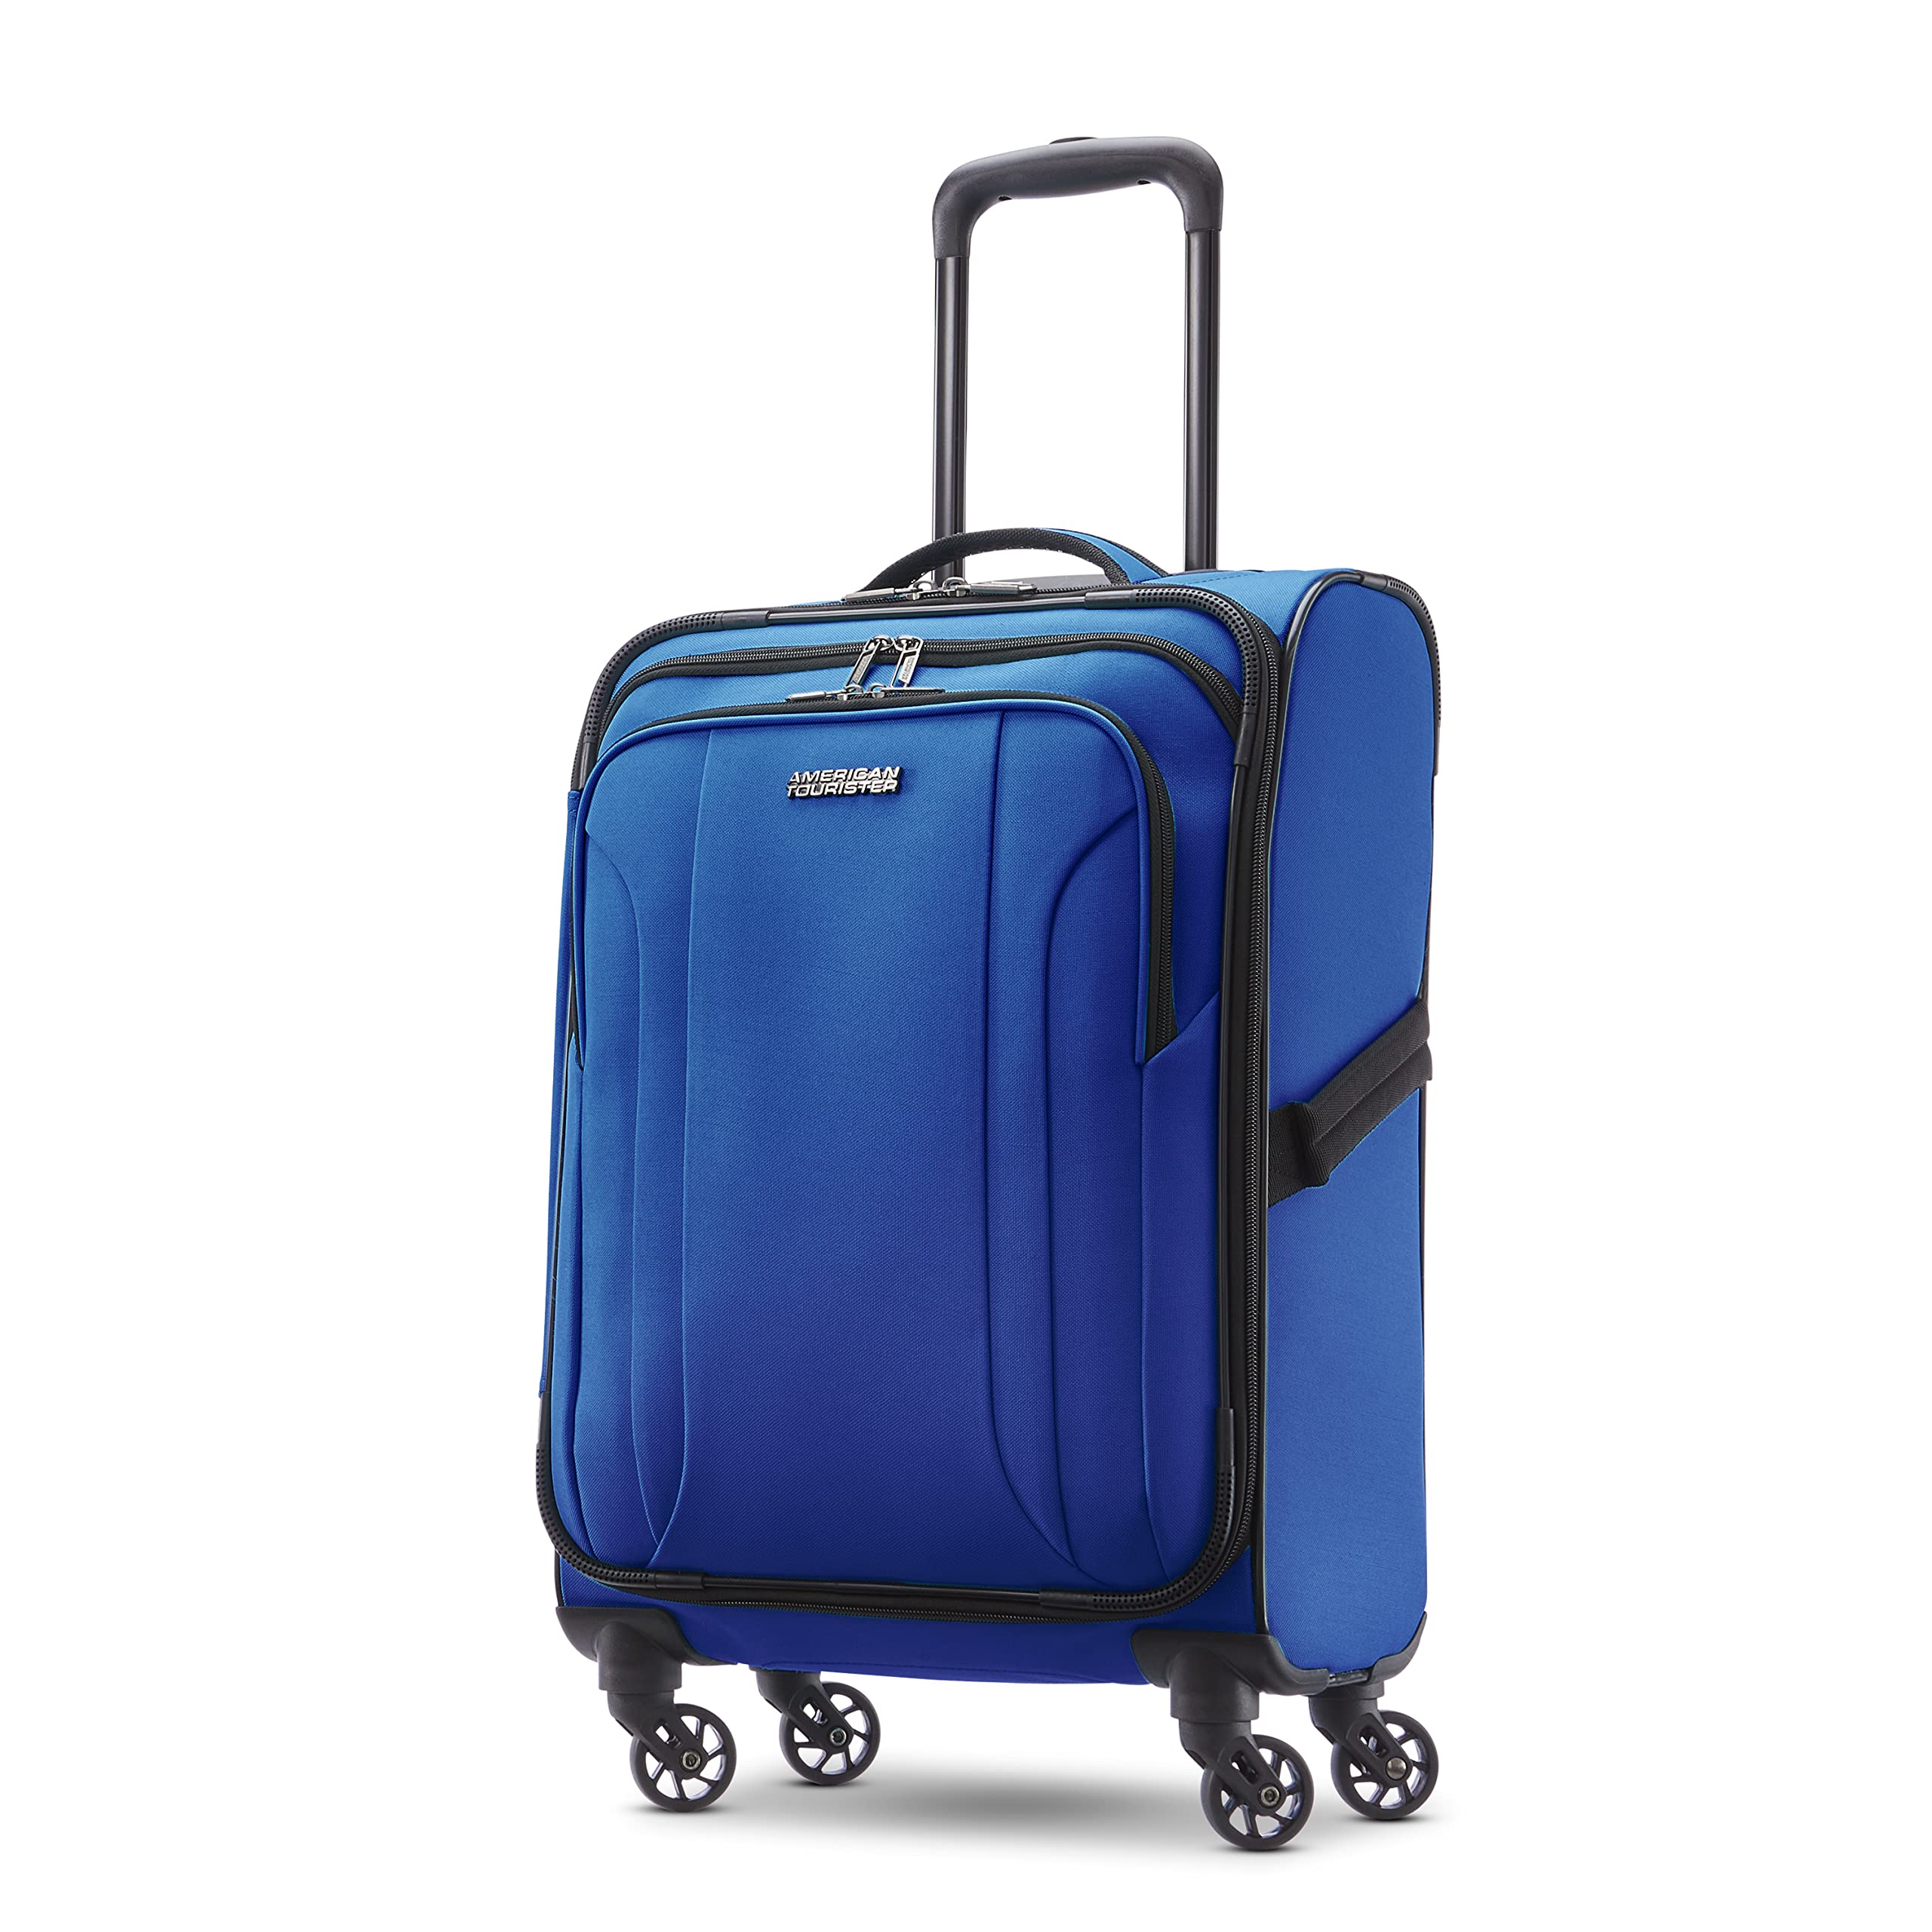 Buy American Tourister Trolley Bags Online in India | Myntra